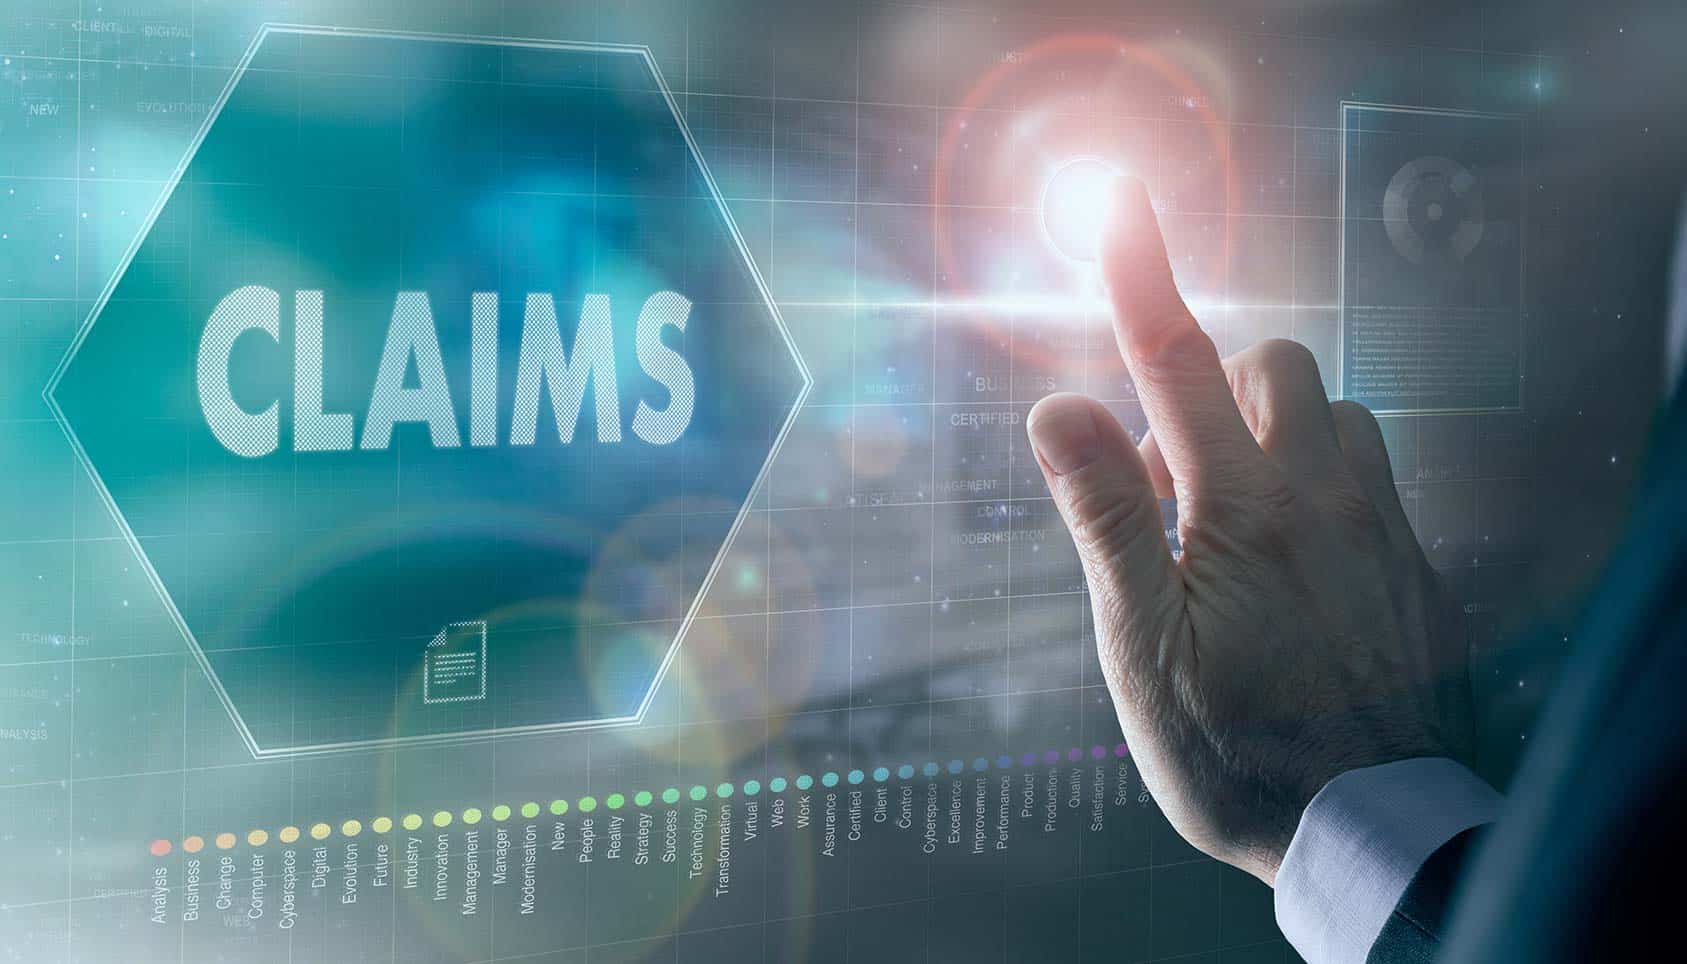 Clinical claims denials threaten healthcare systems budgets as insurance companies weaponize AI against hospitals and patients.